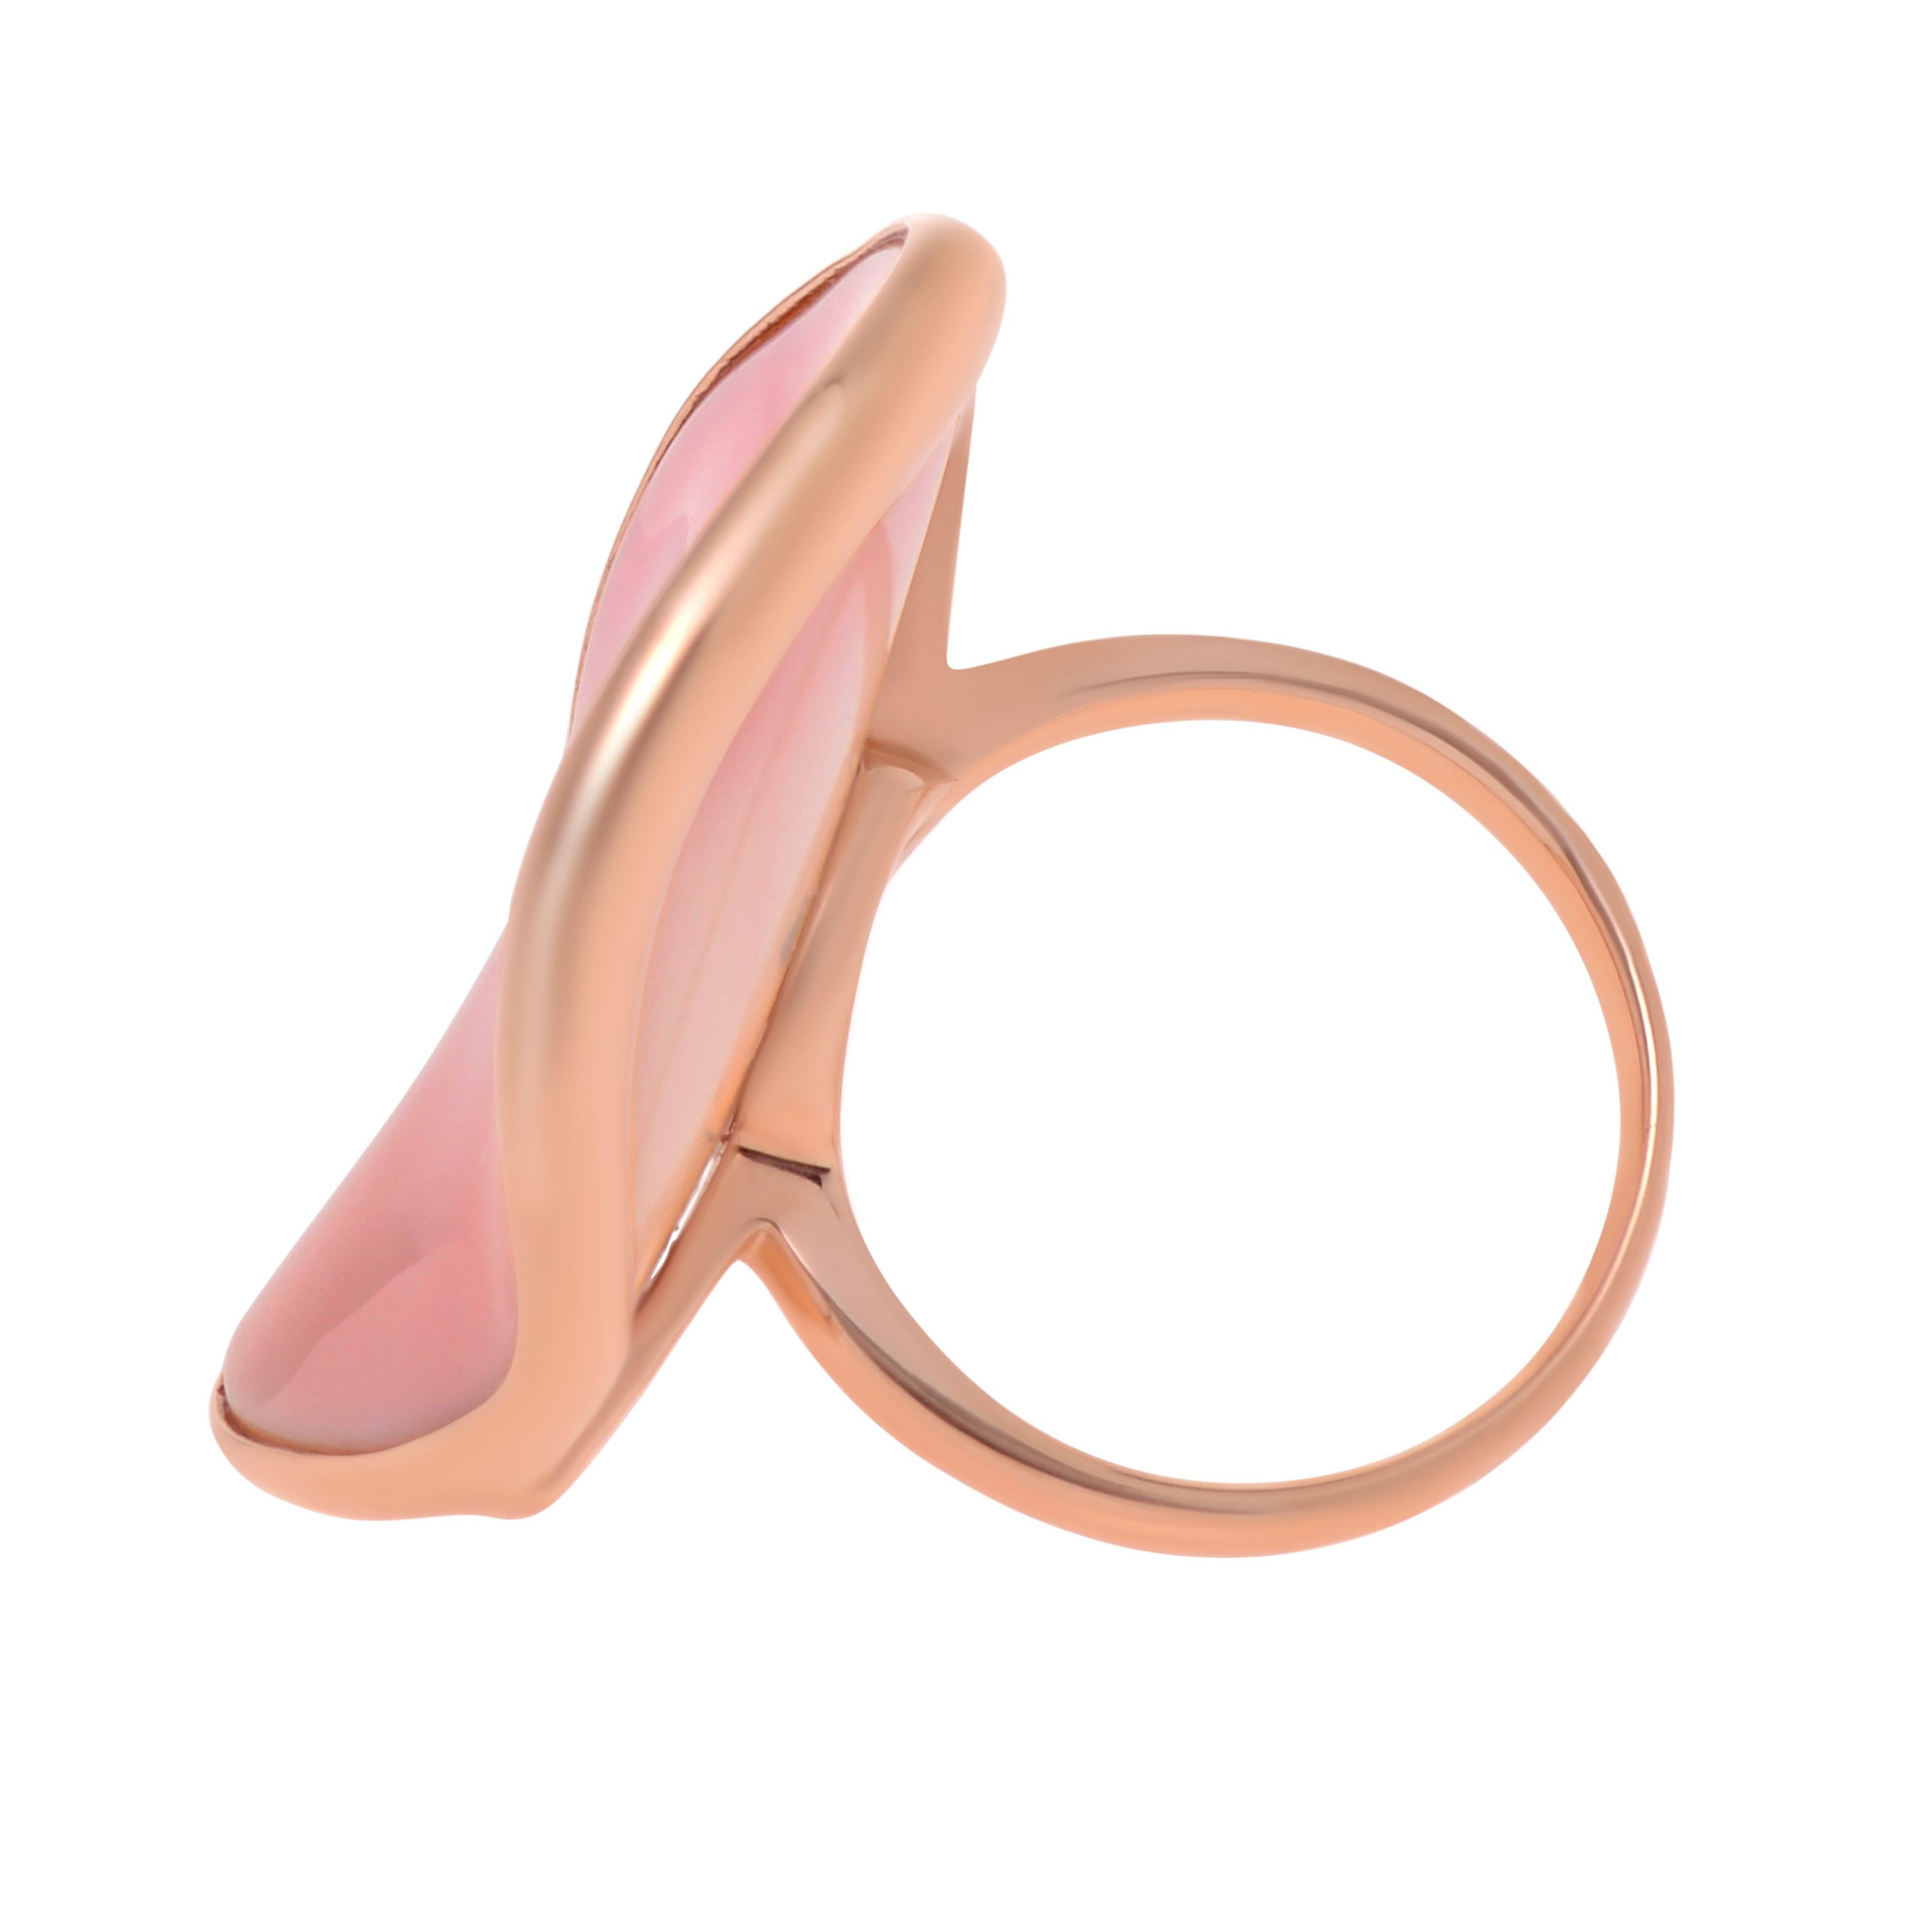 Contemporary Mimi Milano Aurora 18K Rose Gold Mother of Pearl Statement Ring sz 7.25 For Sale